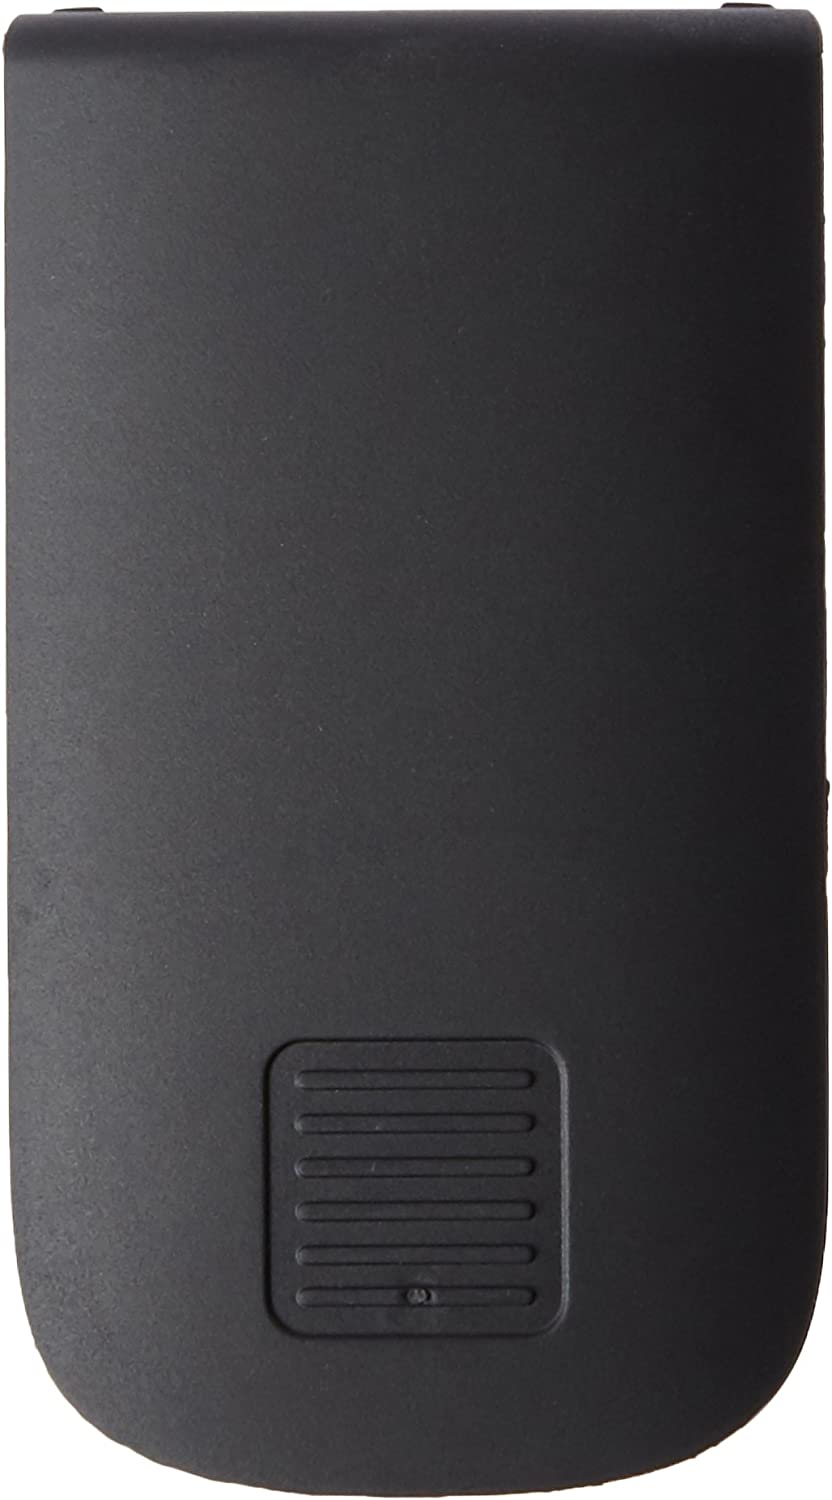 Engenius Battery Case for Multiple Devices - Retail Packaging - Colorless/Unspecified